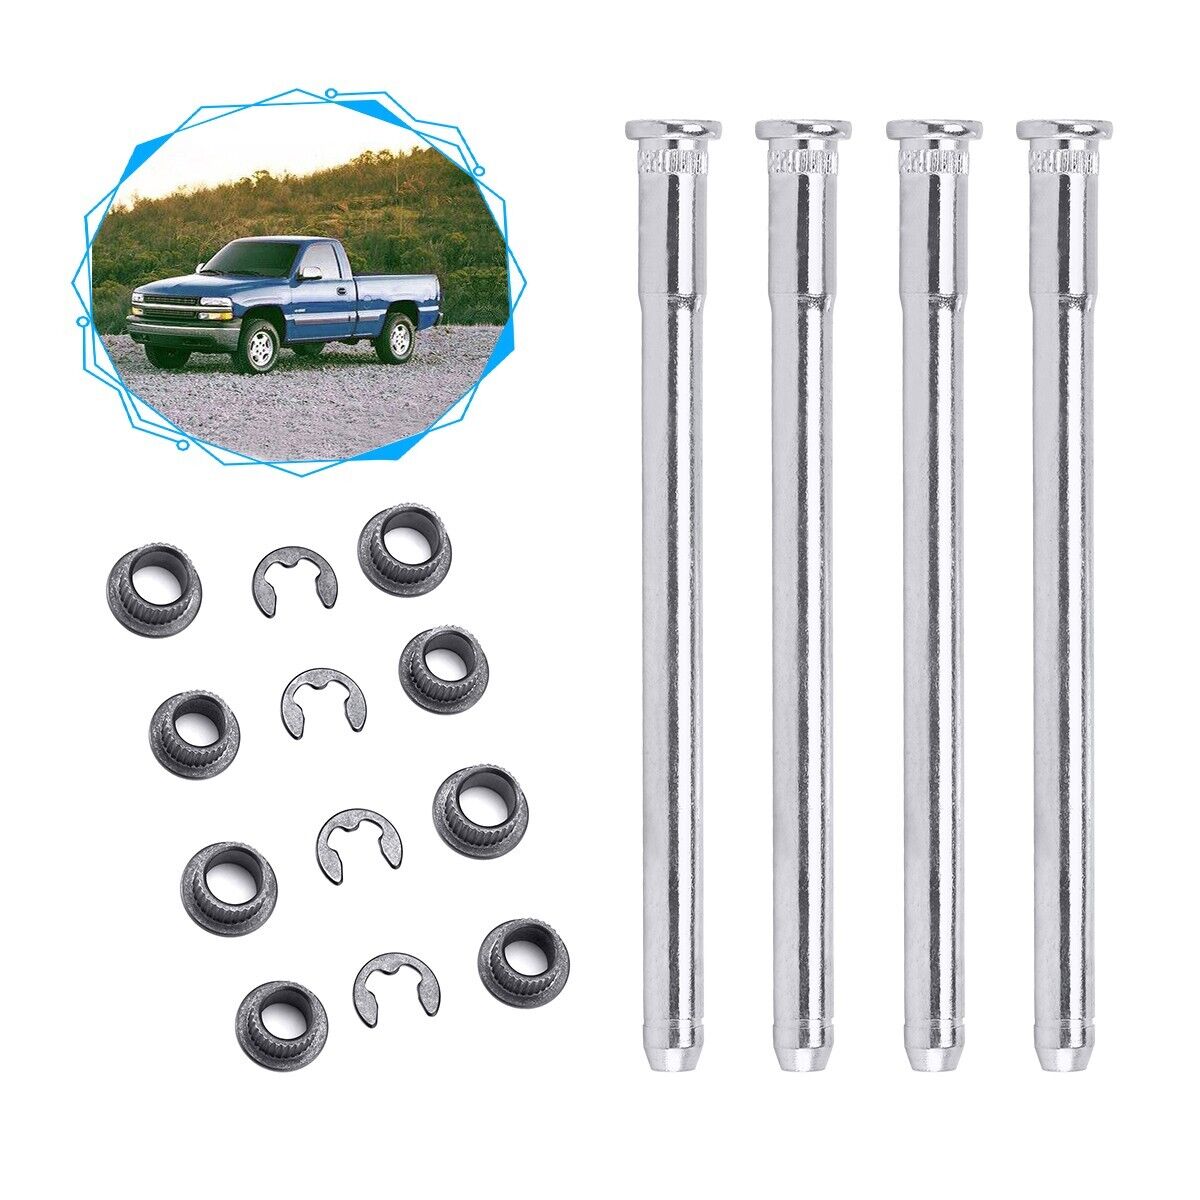 Door Hinge Pins and Bushing Kit 2 Door 4 Pin for 1994 - 2004 Chevy S10 & GMC S15 Unbranded